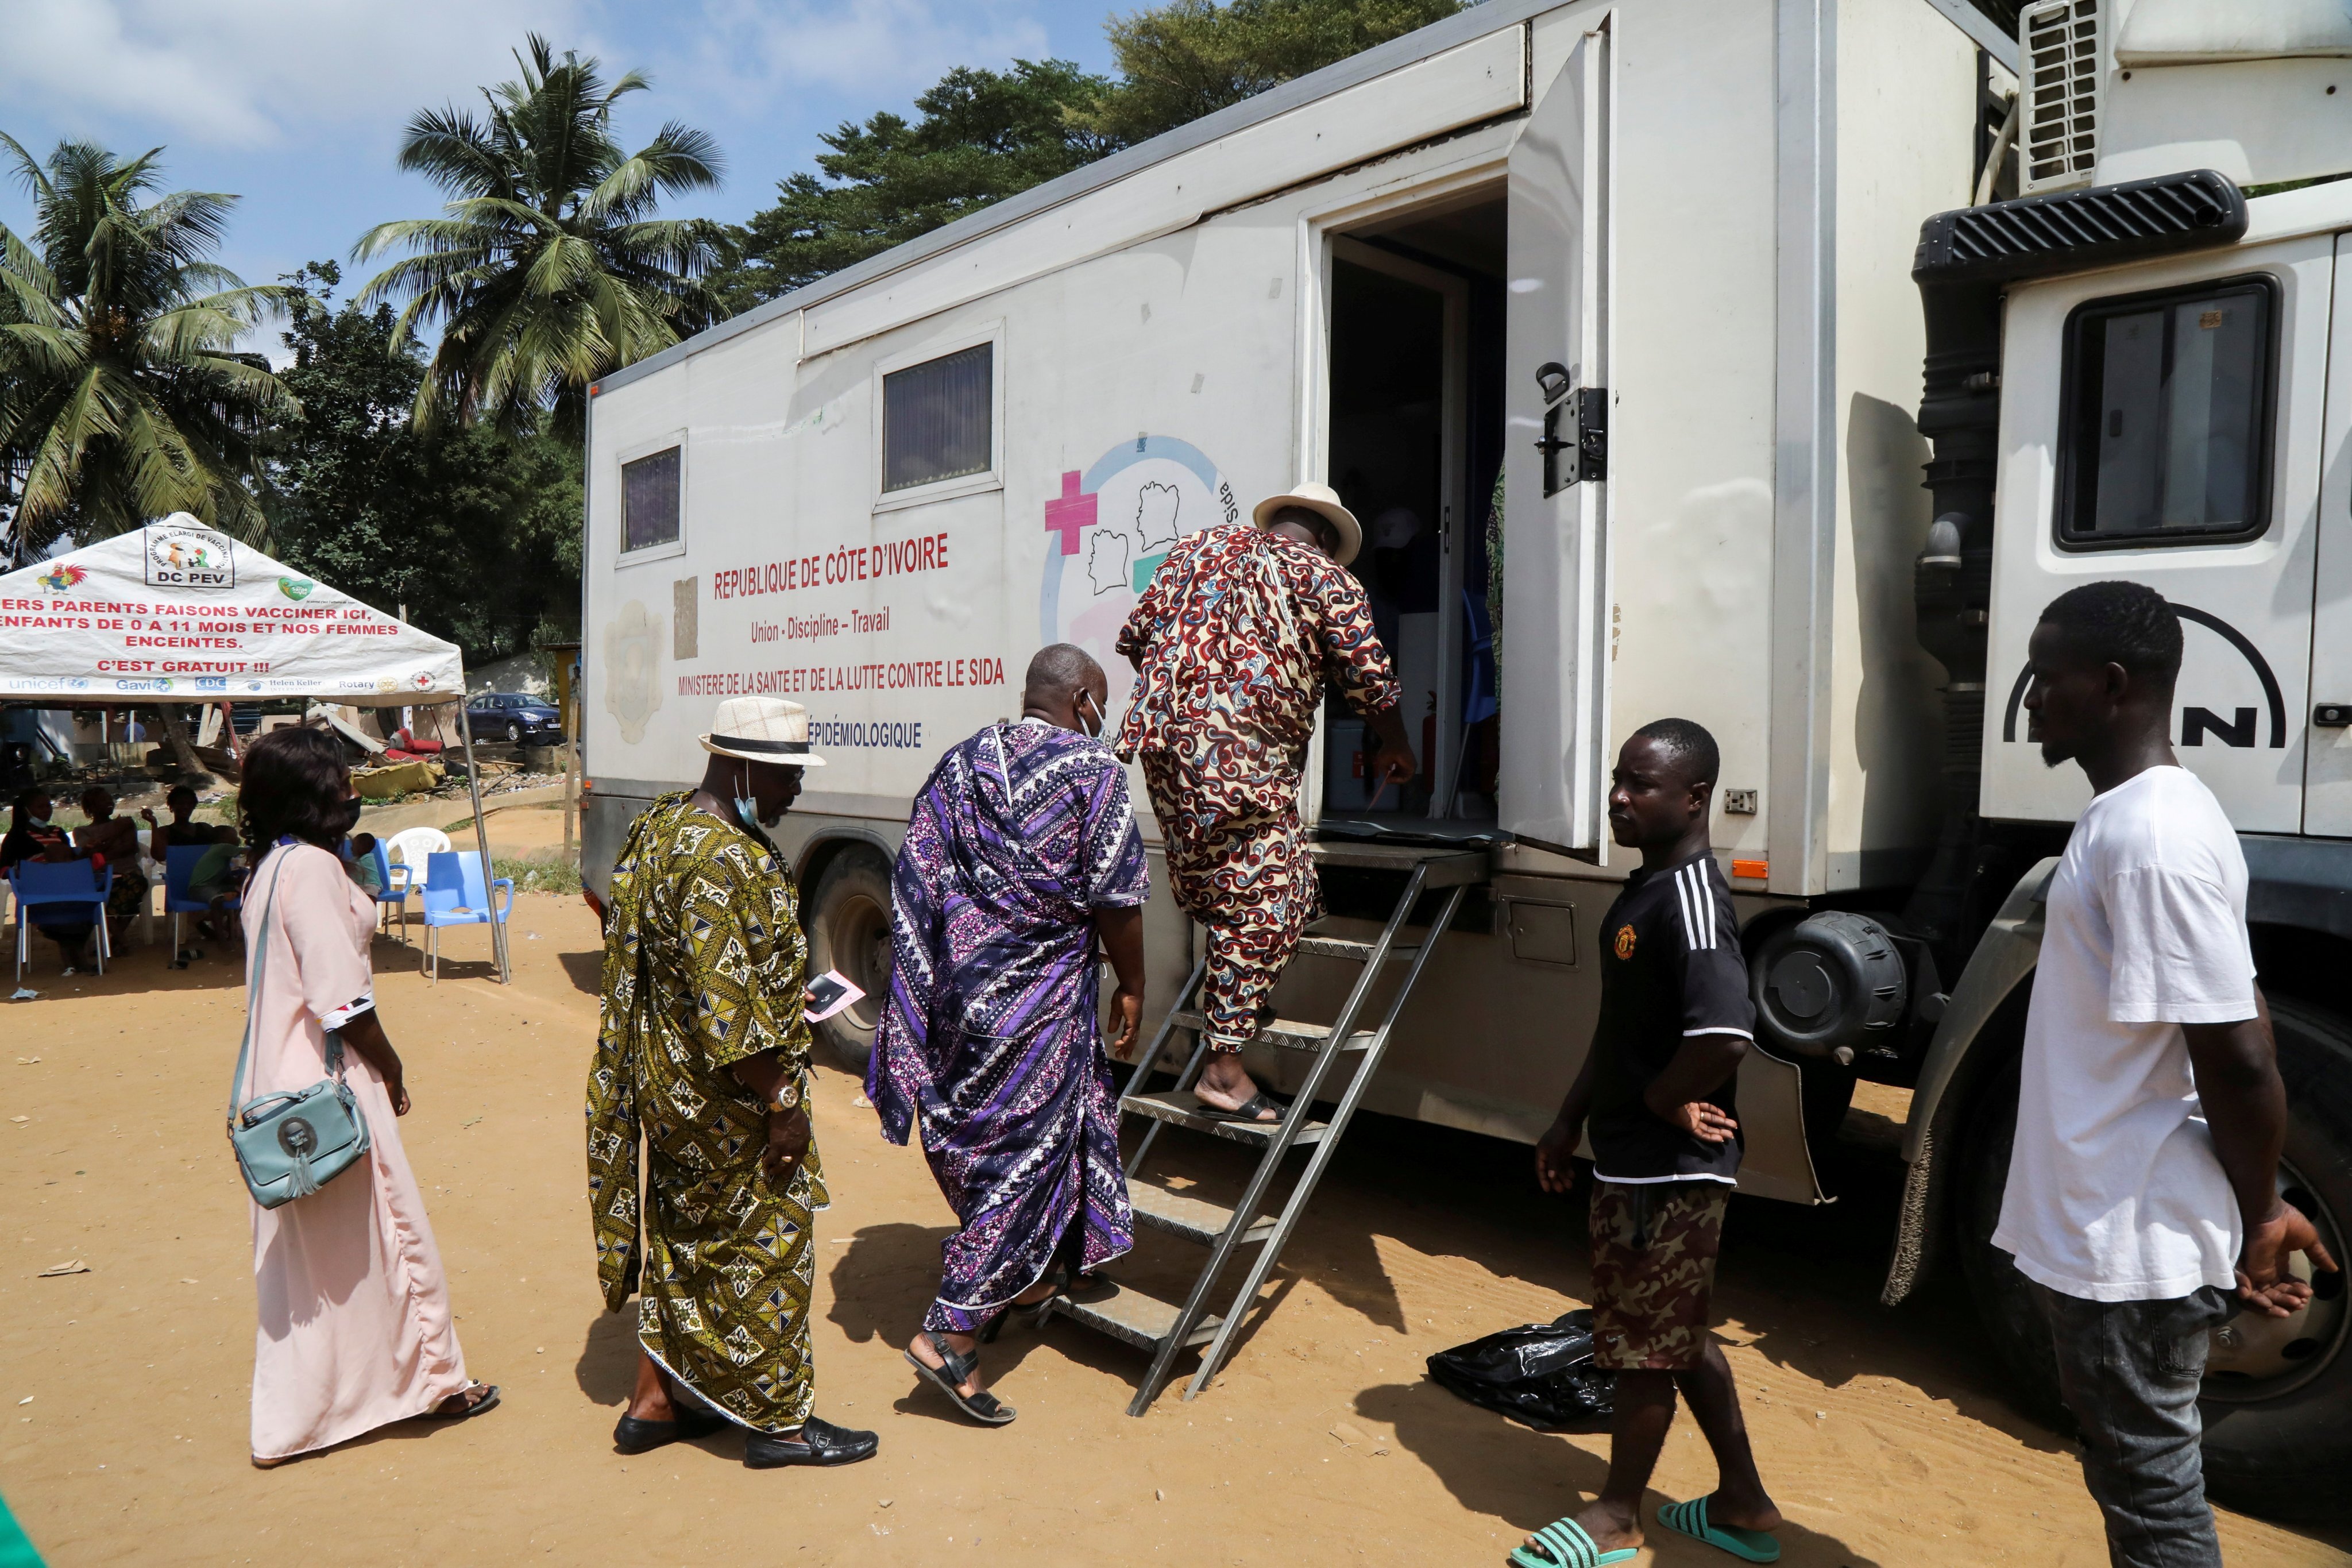 People enter a mobile vaccination centre to receive a Covid-19 vaccine in Abidjan, Ivory Coast, on September 23. Just 5 per cent of adults in low-income countries are vaccinated at a time when wealthy countries are giving booster shots and letting vaccine doses go to waste. Photo: Reuters